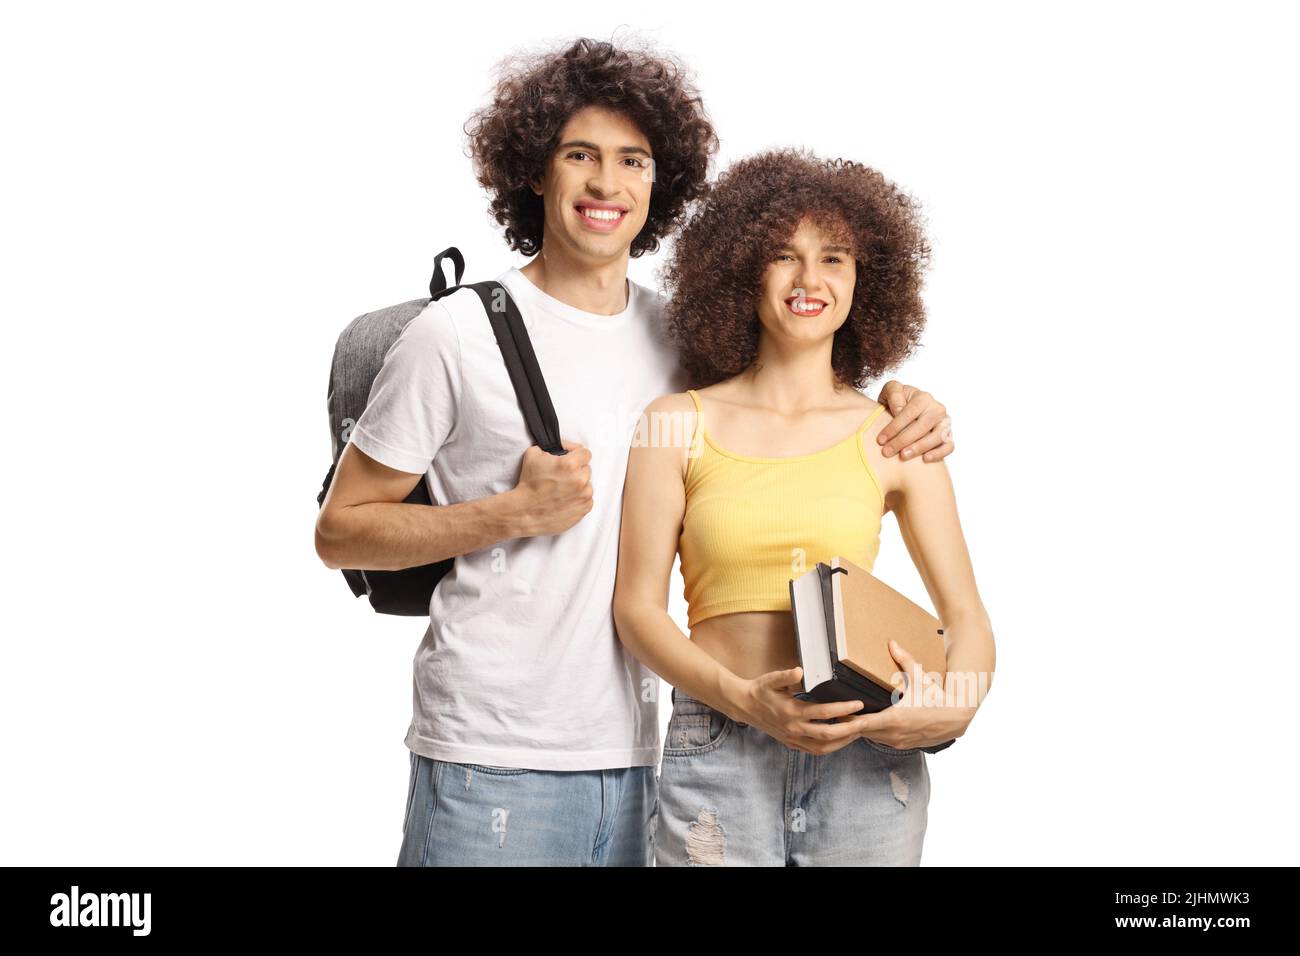 Male and female students with curly hair with books and backpack smiling at camera isolated on white background Stock Photo